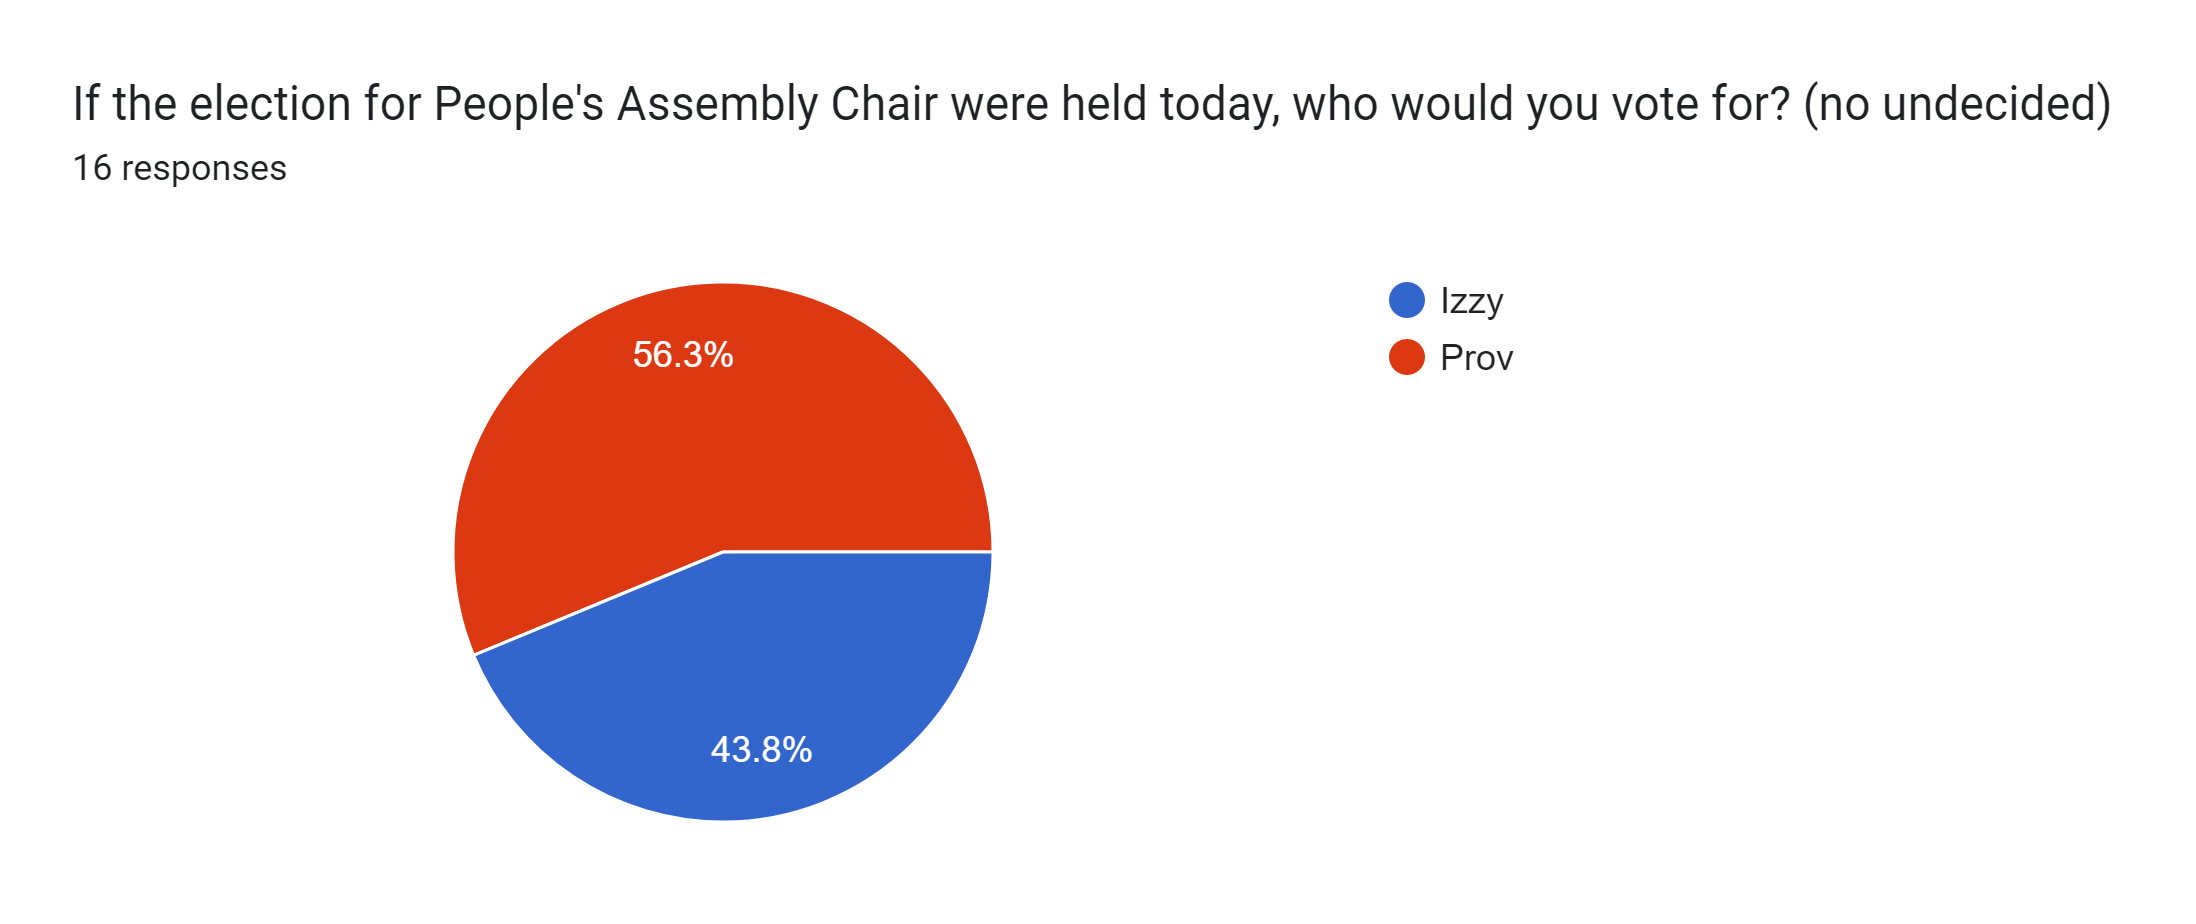 Forms response chart. Question title: If the election for People's Assembly Chair were held today, who would you vote for? (no undecided). Number of responses: 16 responses.